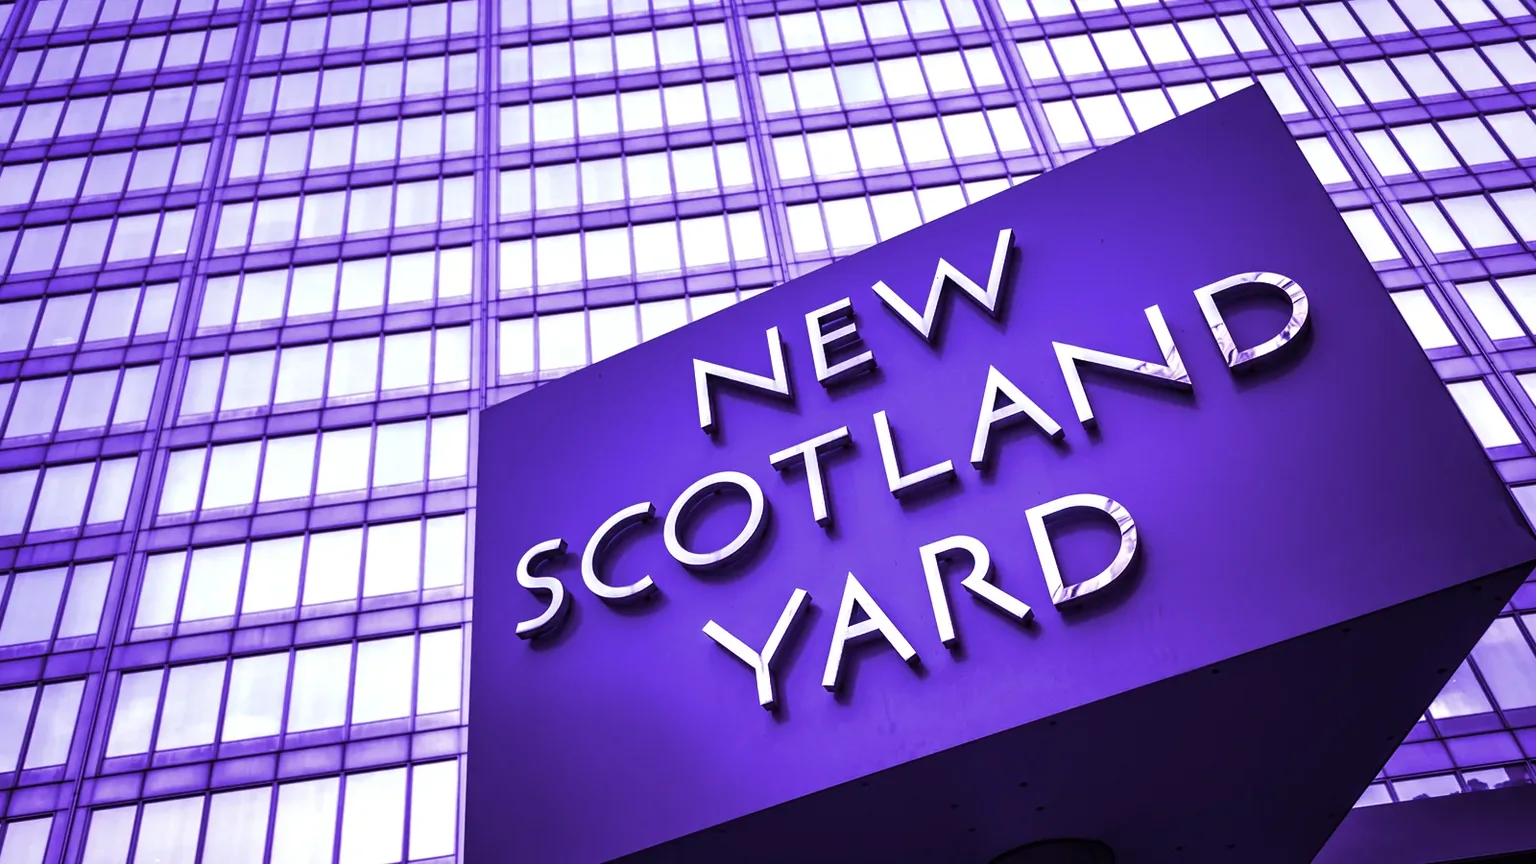 Scotland Yard is the name of the London Metropolitan Police's headquarters. Image: Shutterstock